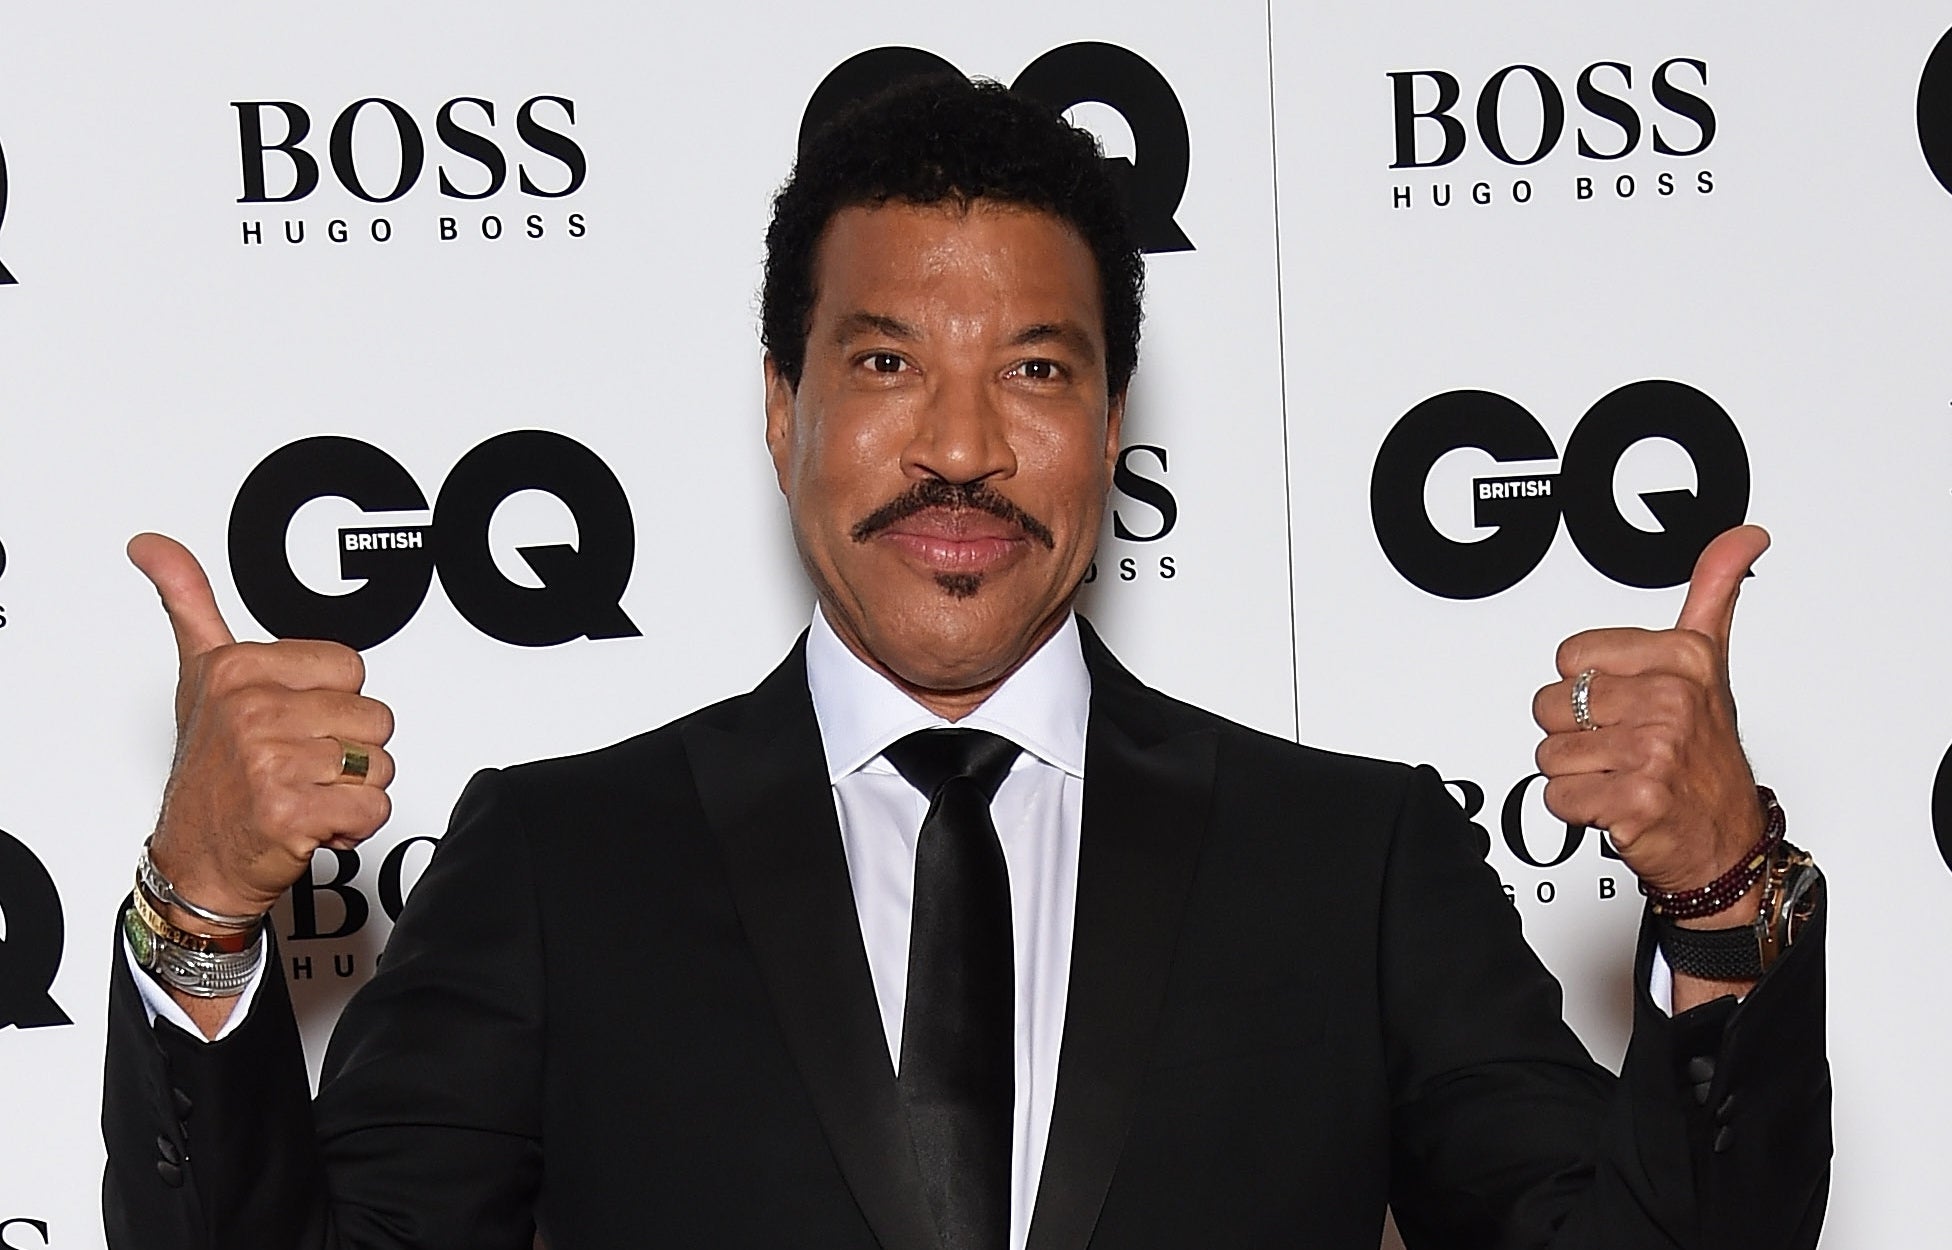 Lionel Richie has defended his fellow judge Katy Perry